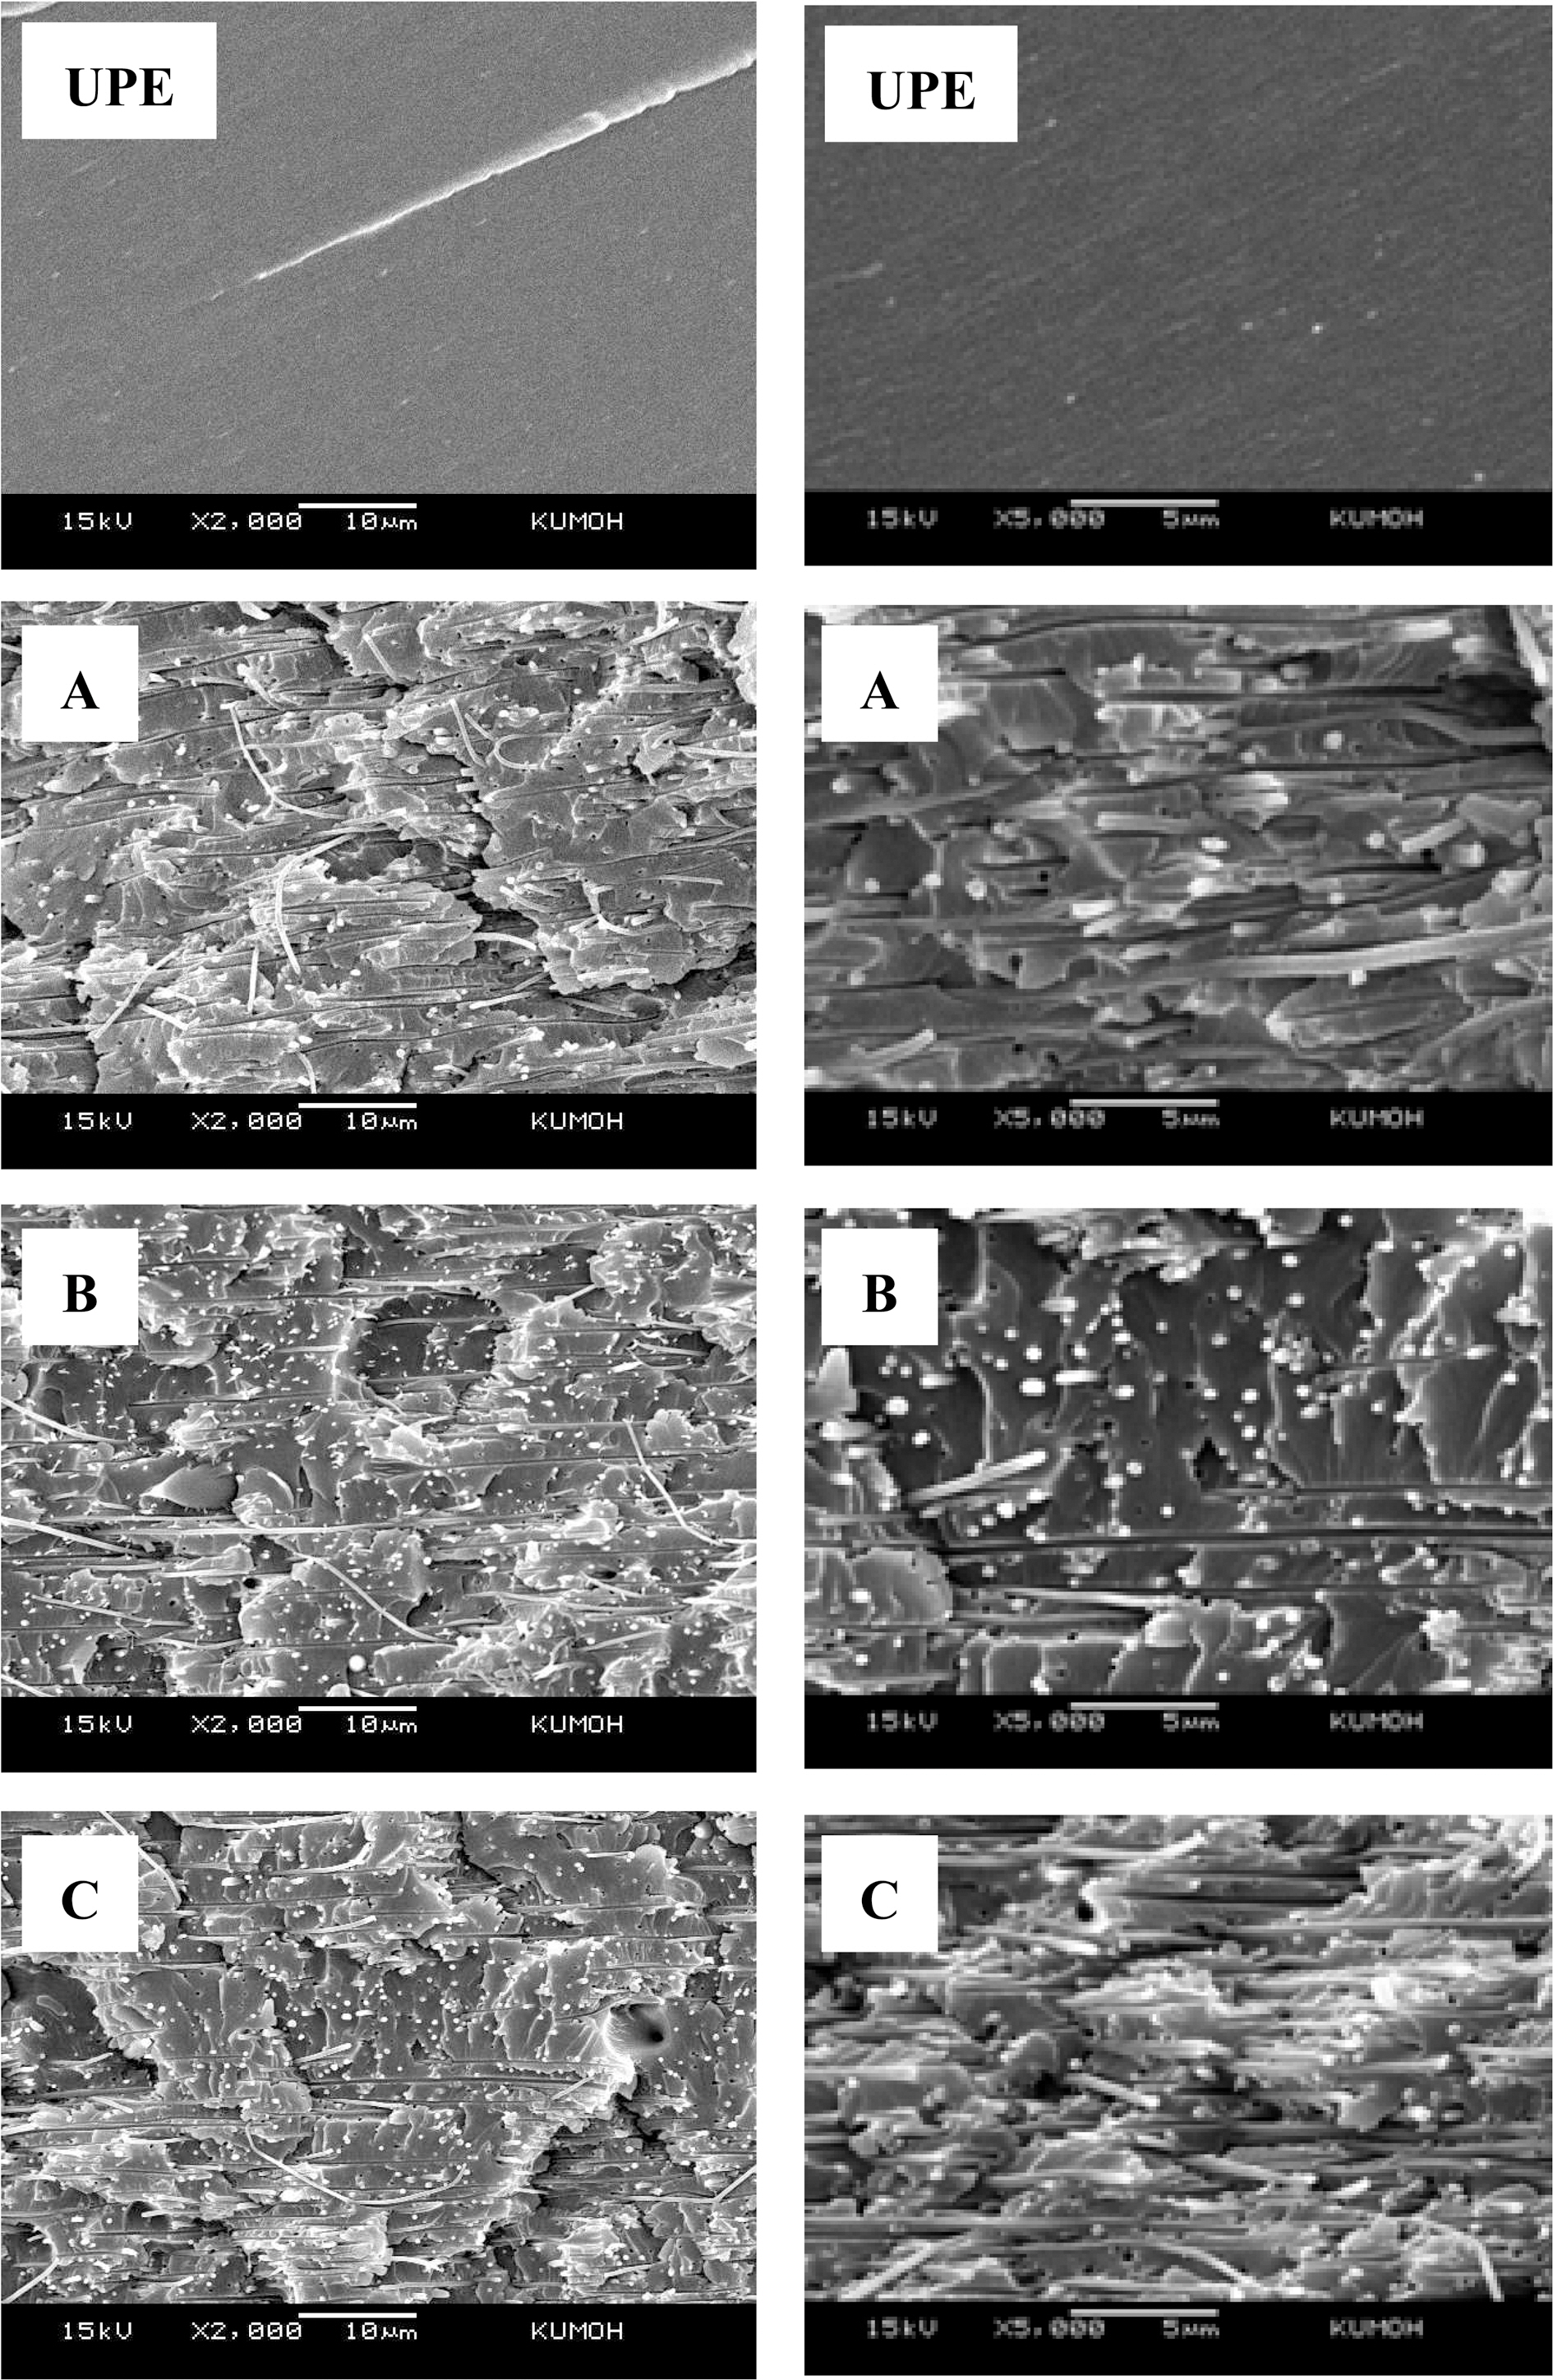 SEM micrographs showing the fracture surfaces of UPE matrix and PAN nanofiber web/UPE composites with different web contents. (A) 2 wt.% (B) 4 wt.% (C) 8 wt.% (Left 4:×2000 Right 4: ×5000)